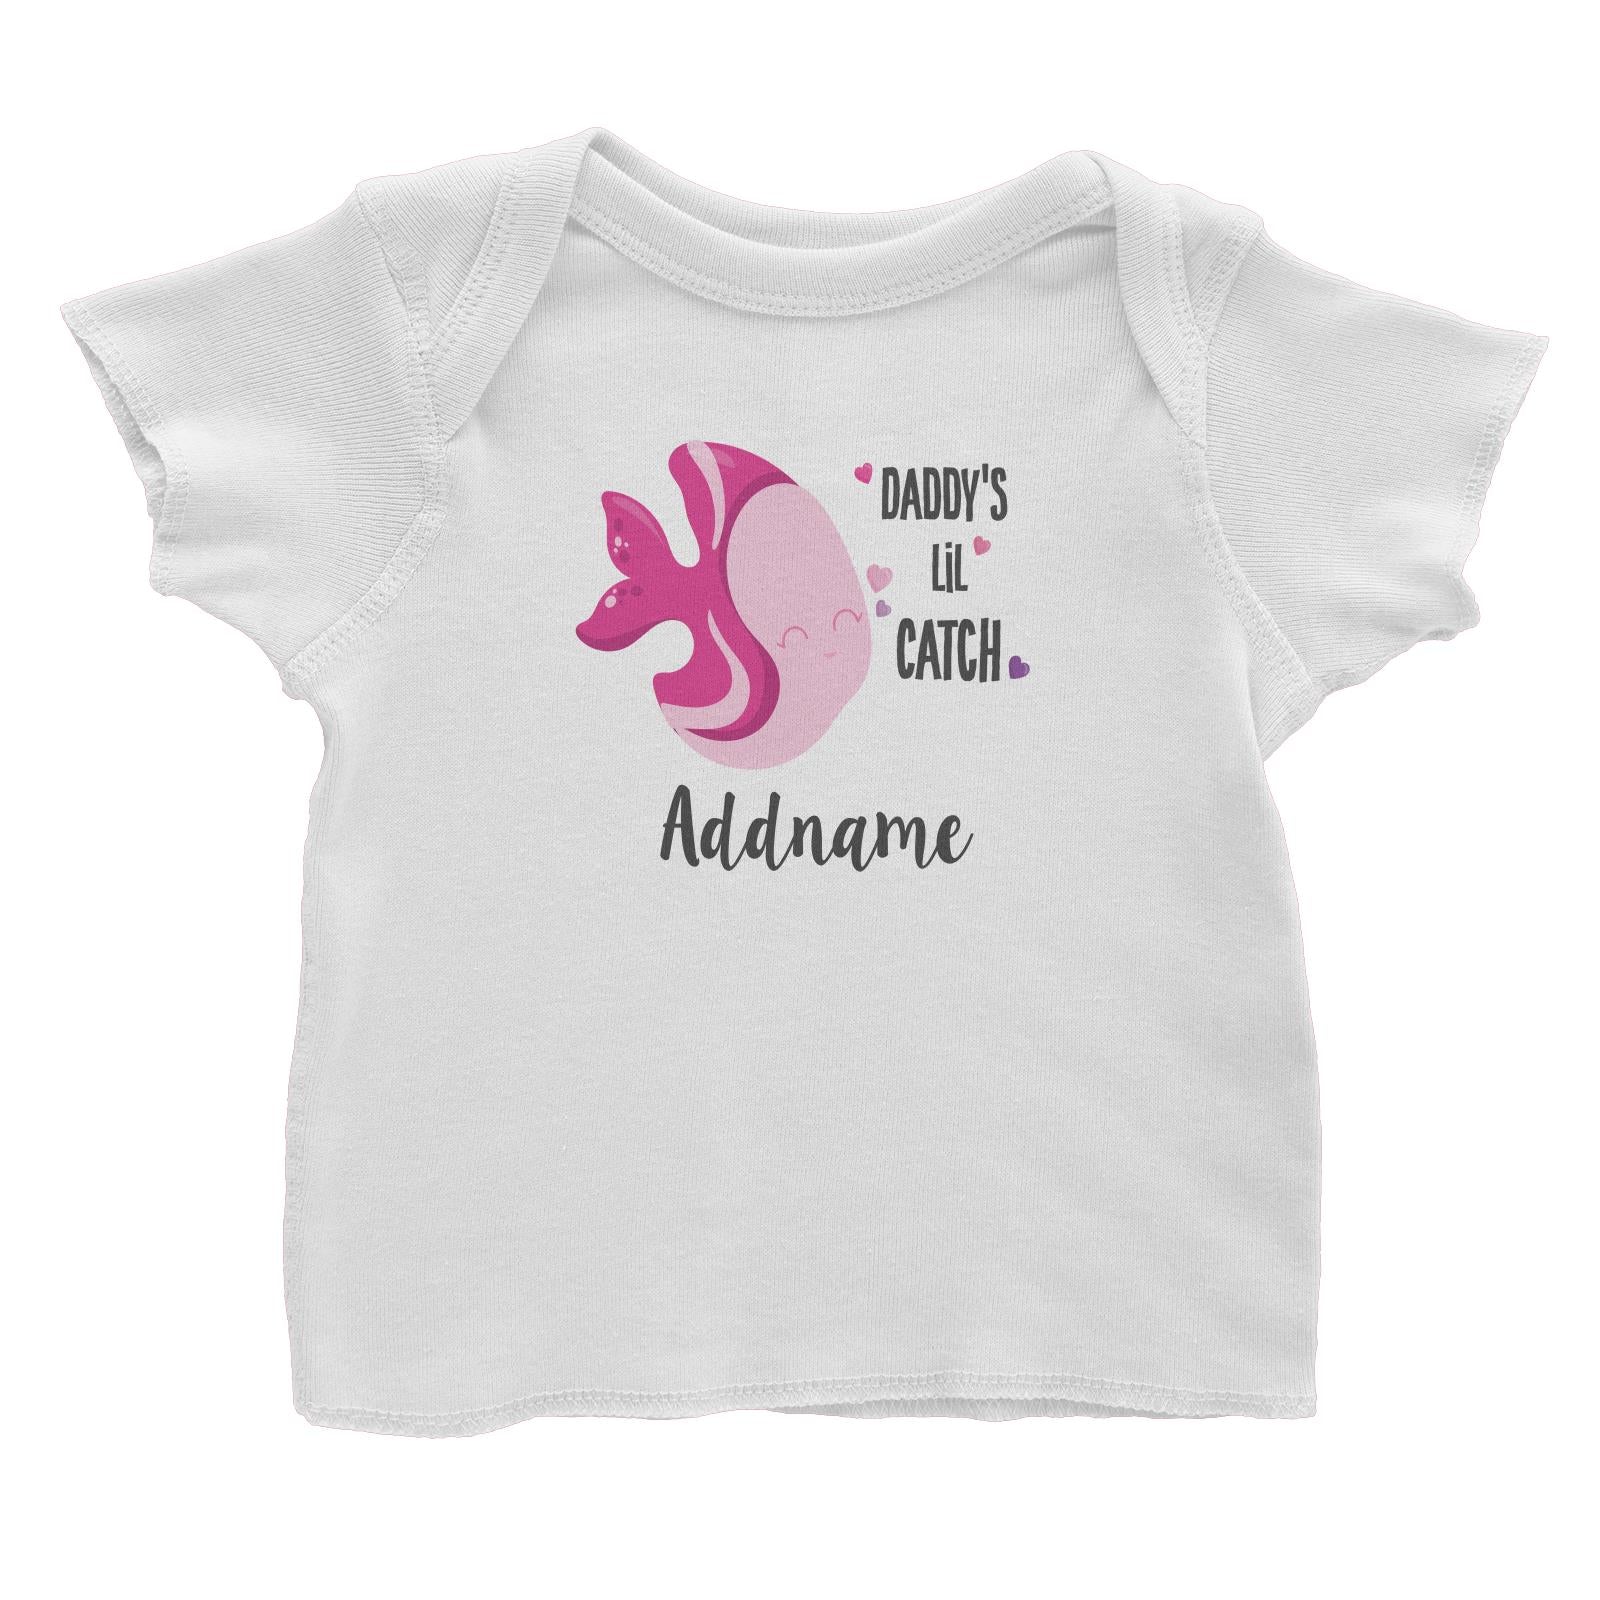 Cute Sea Animals Pink Fish Daddy's Lil Catch Addname Baby T-Shirt